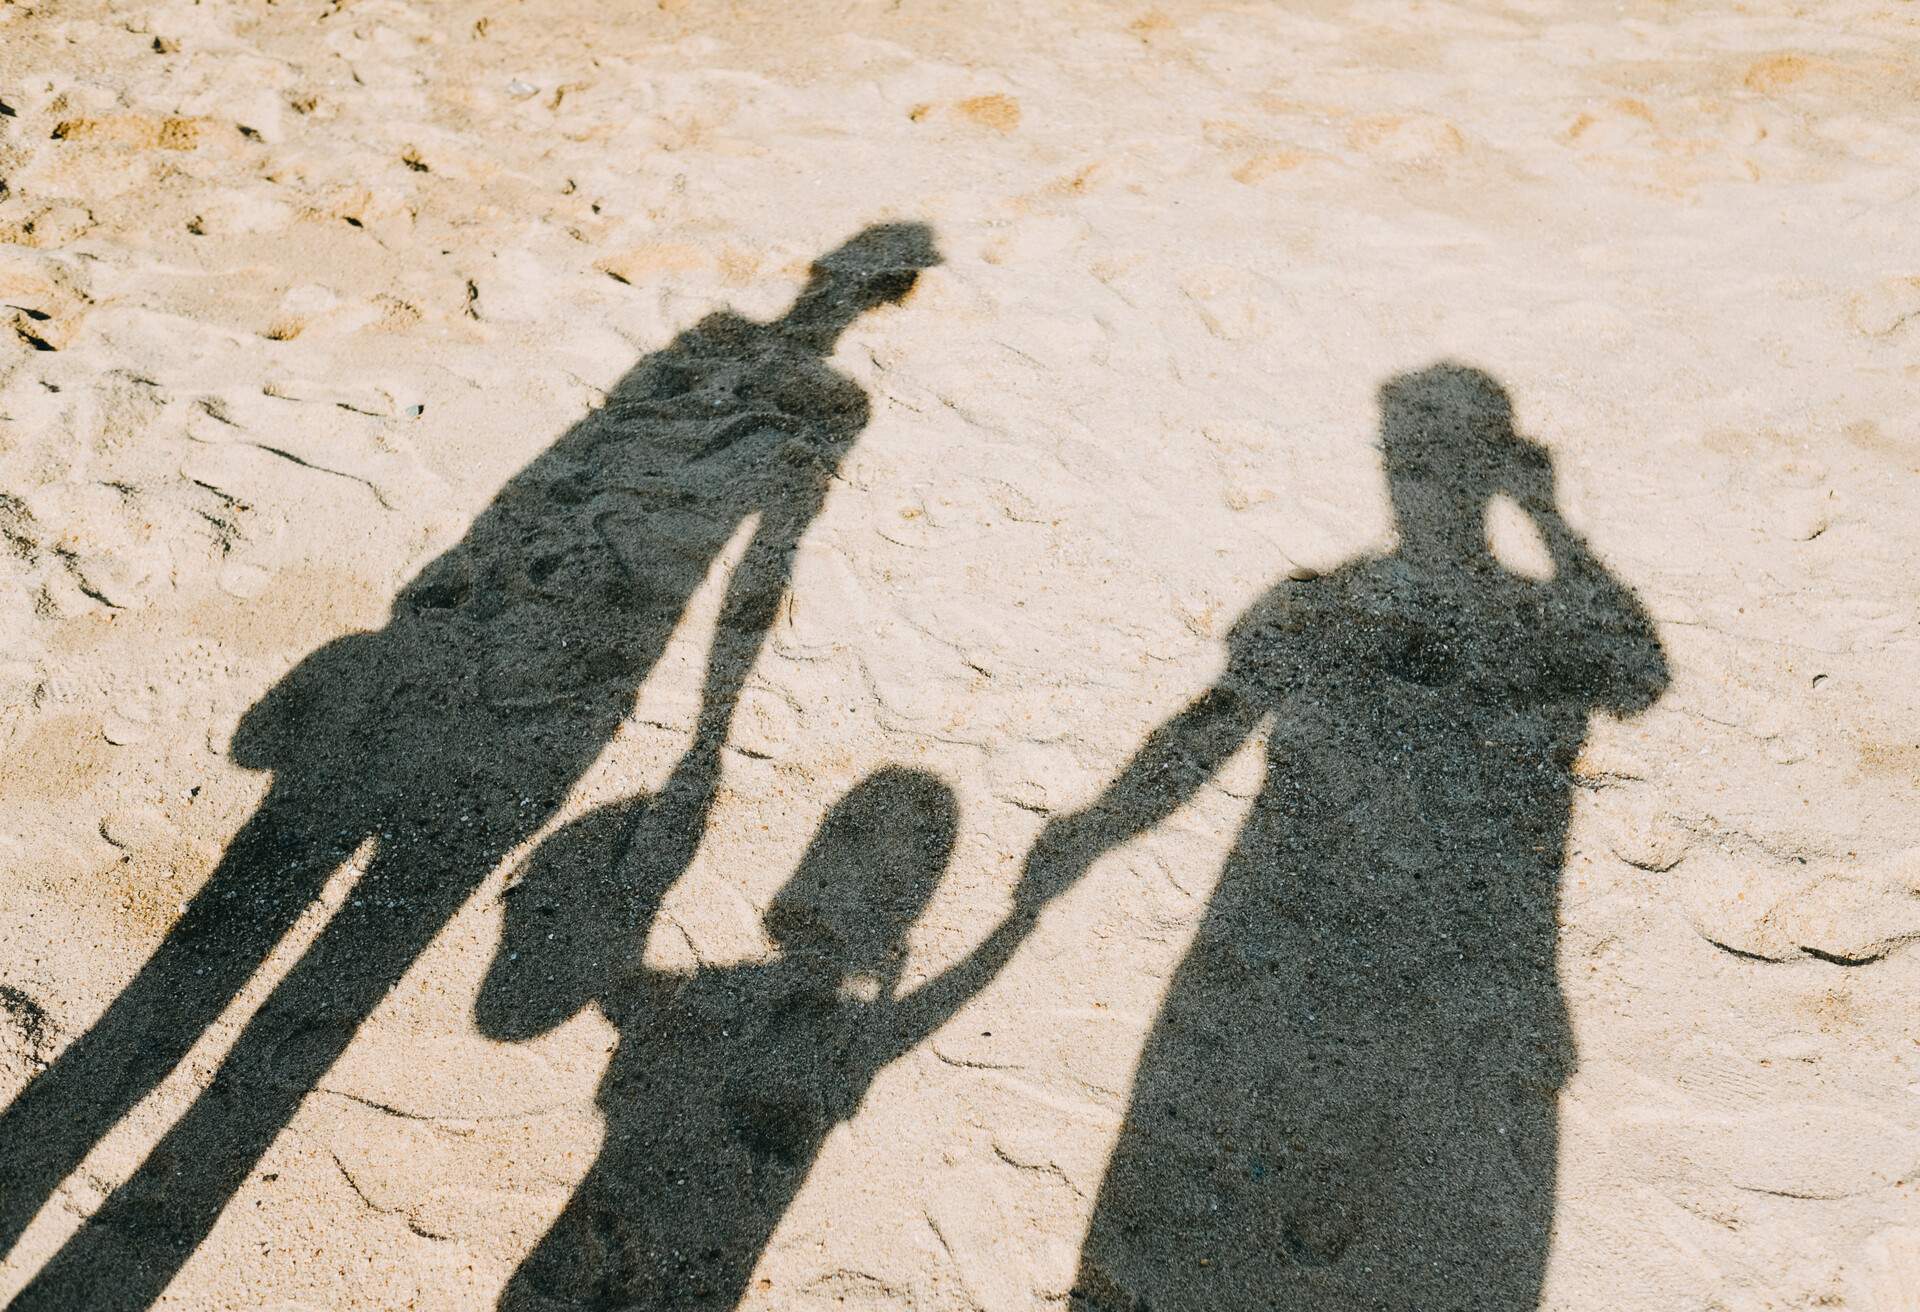 Shadow on sandy beach of a loving family of three holding hands relaxing on a lovely sunny day